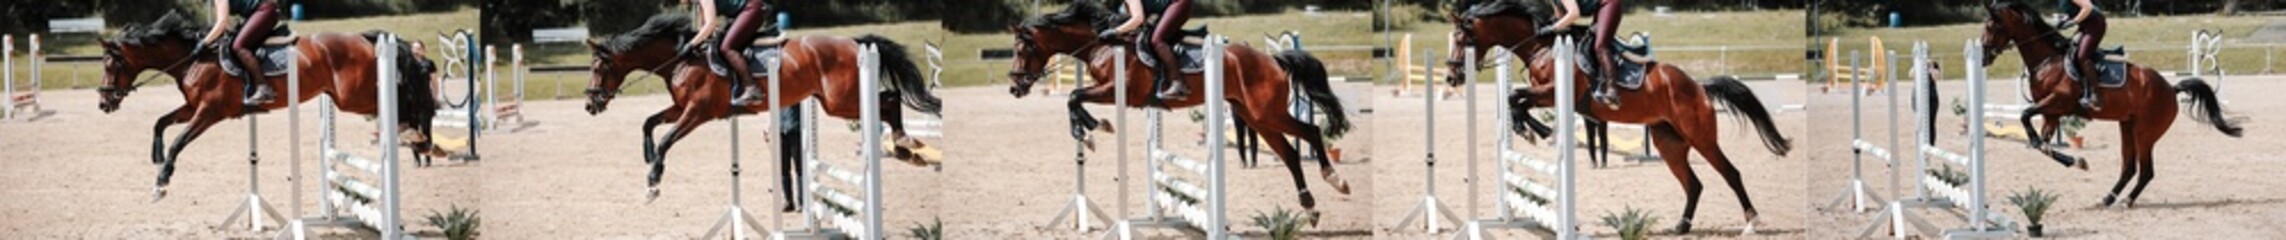 Horse, jumping horse, series of photos when jumping over an obstacle..